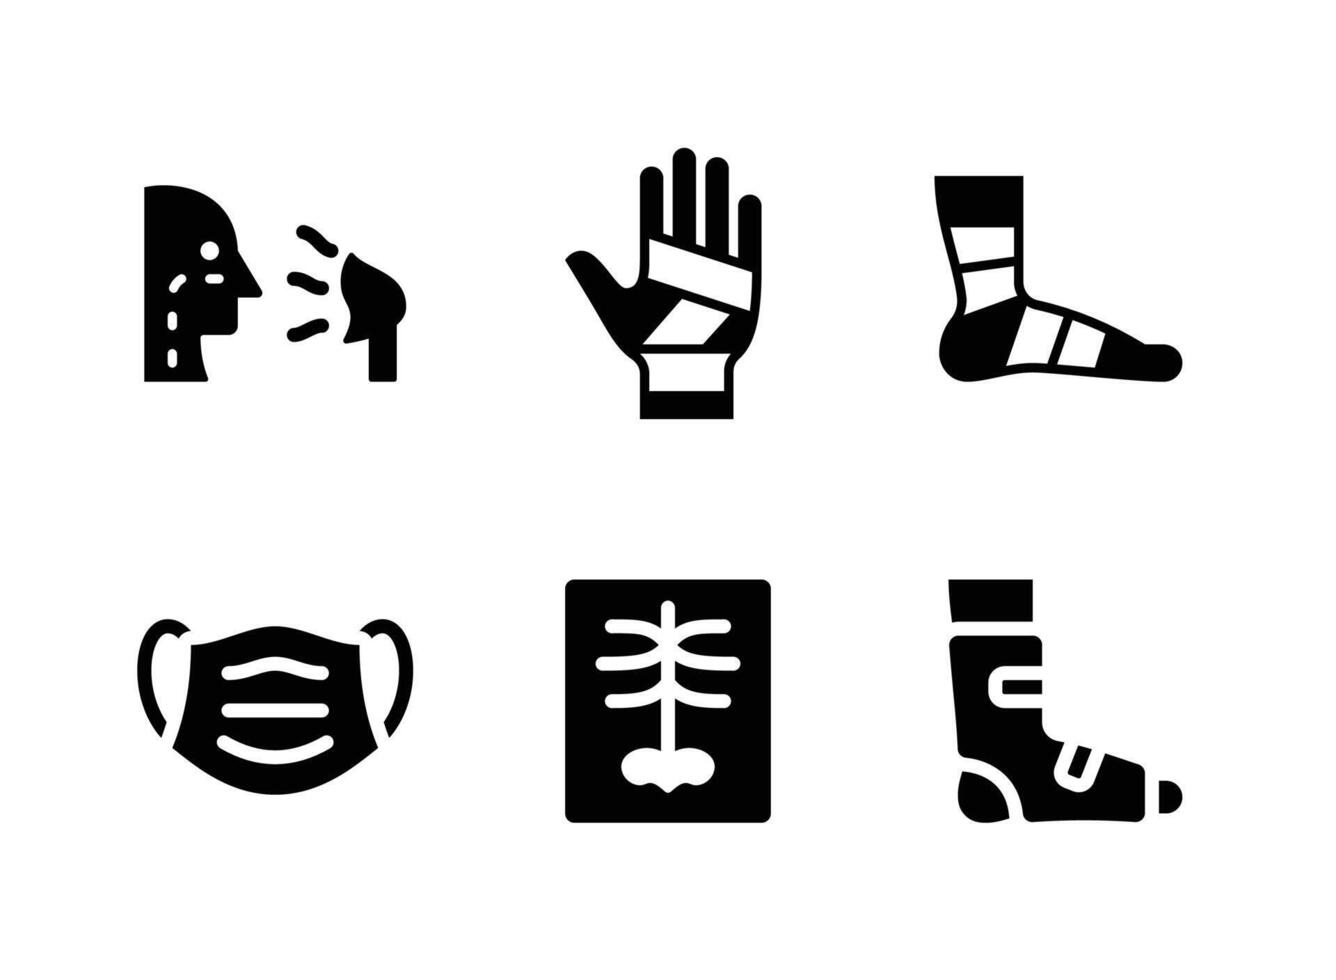 Simple Set of Medical Equipment Vector Solid Icons